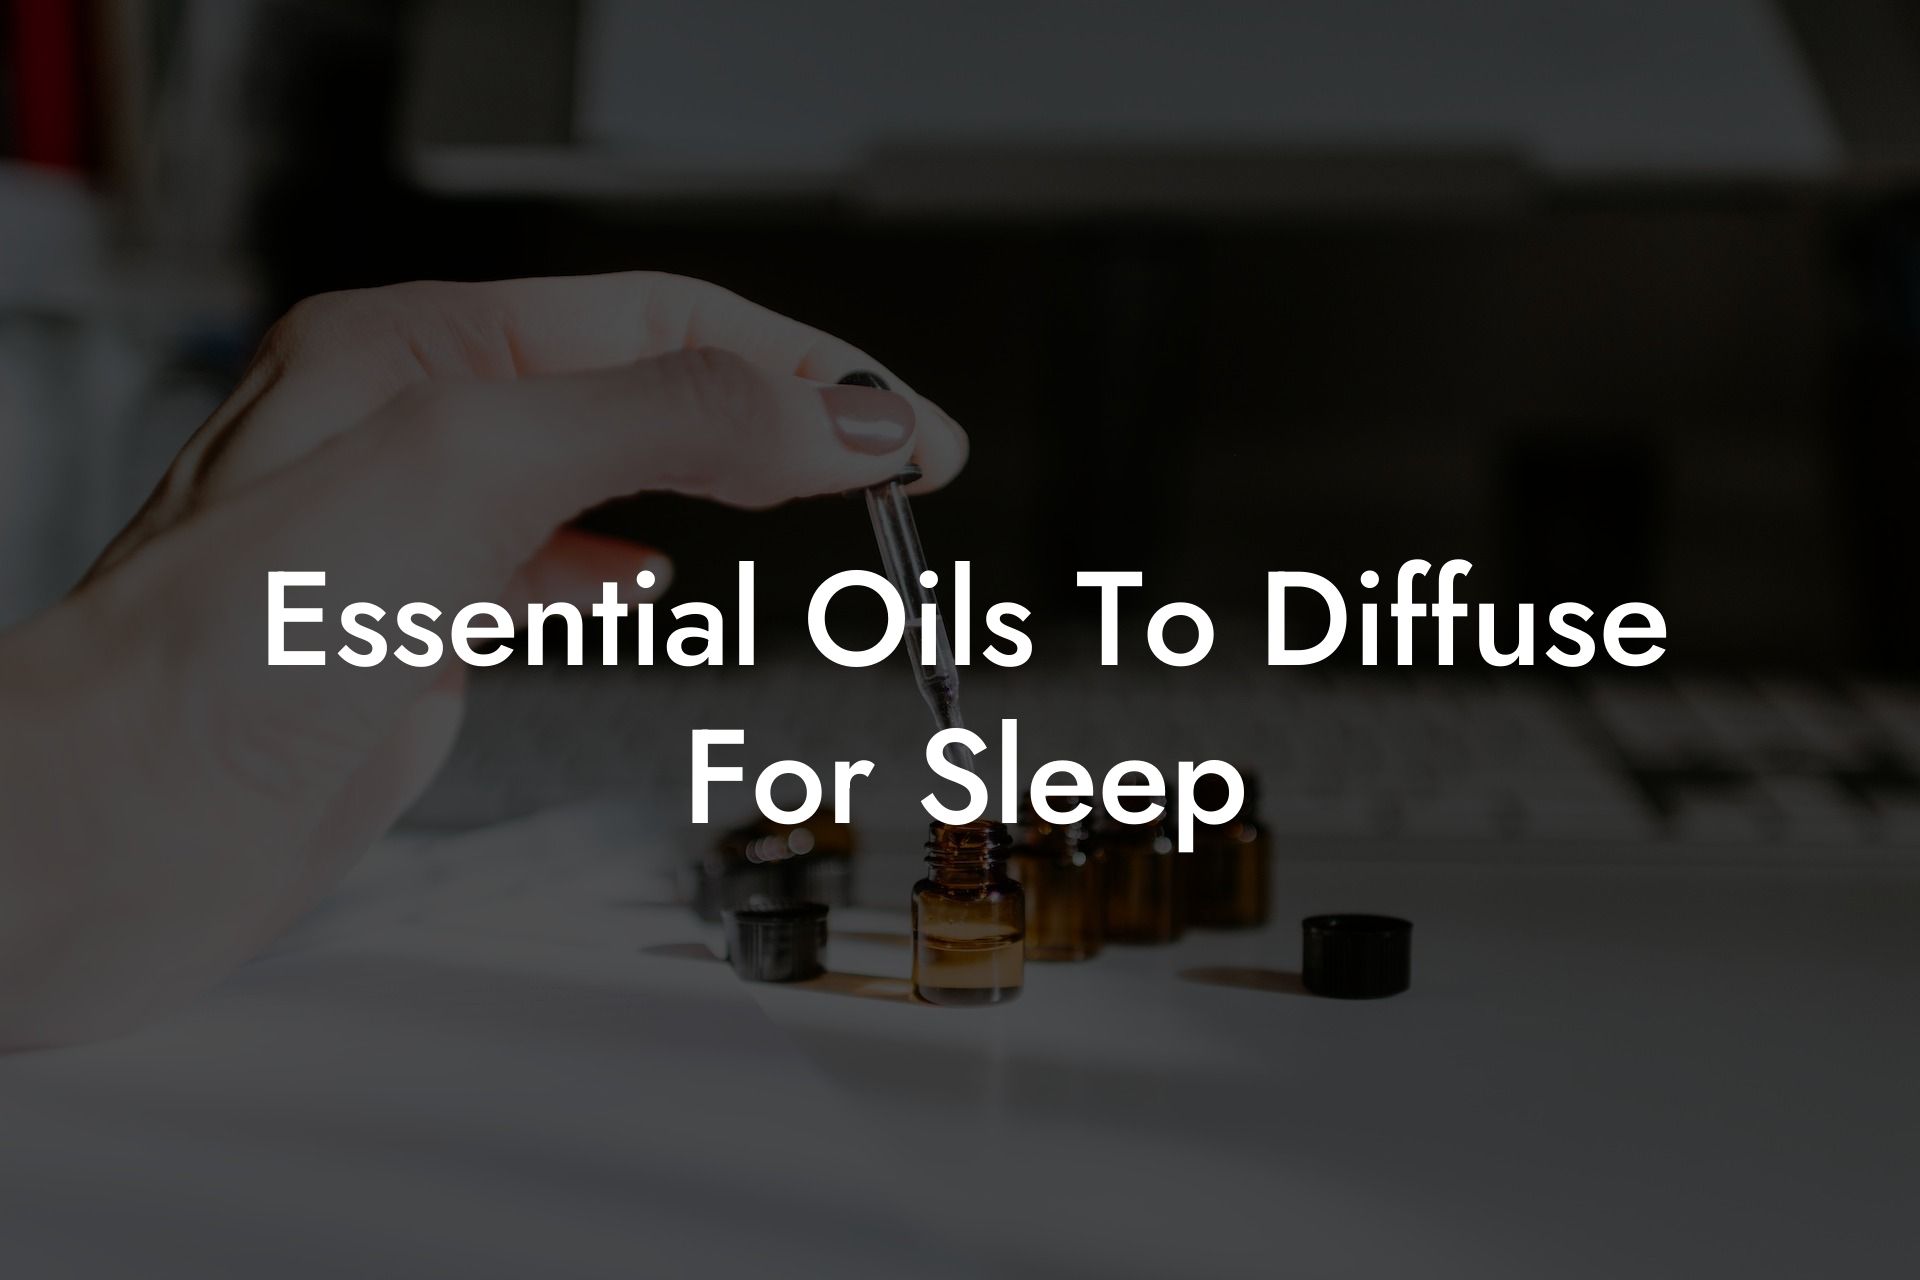 Essential Oils To Diffuse For Sleep